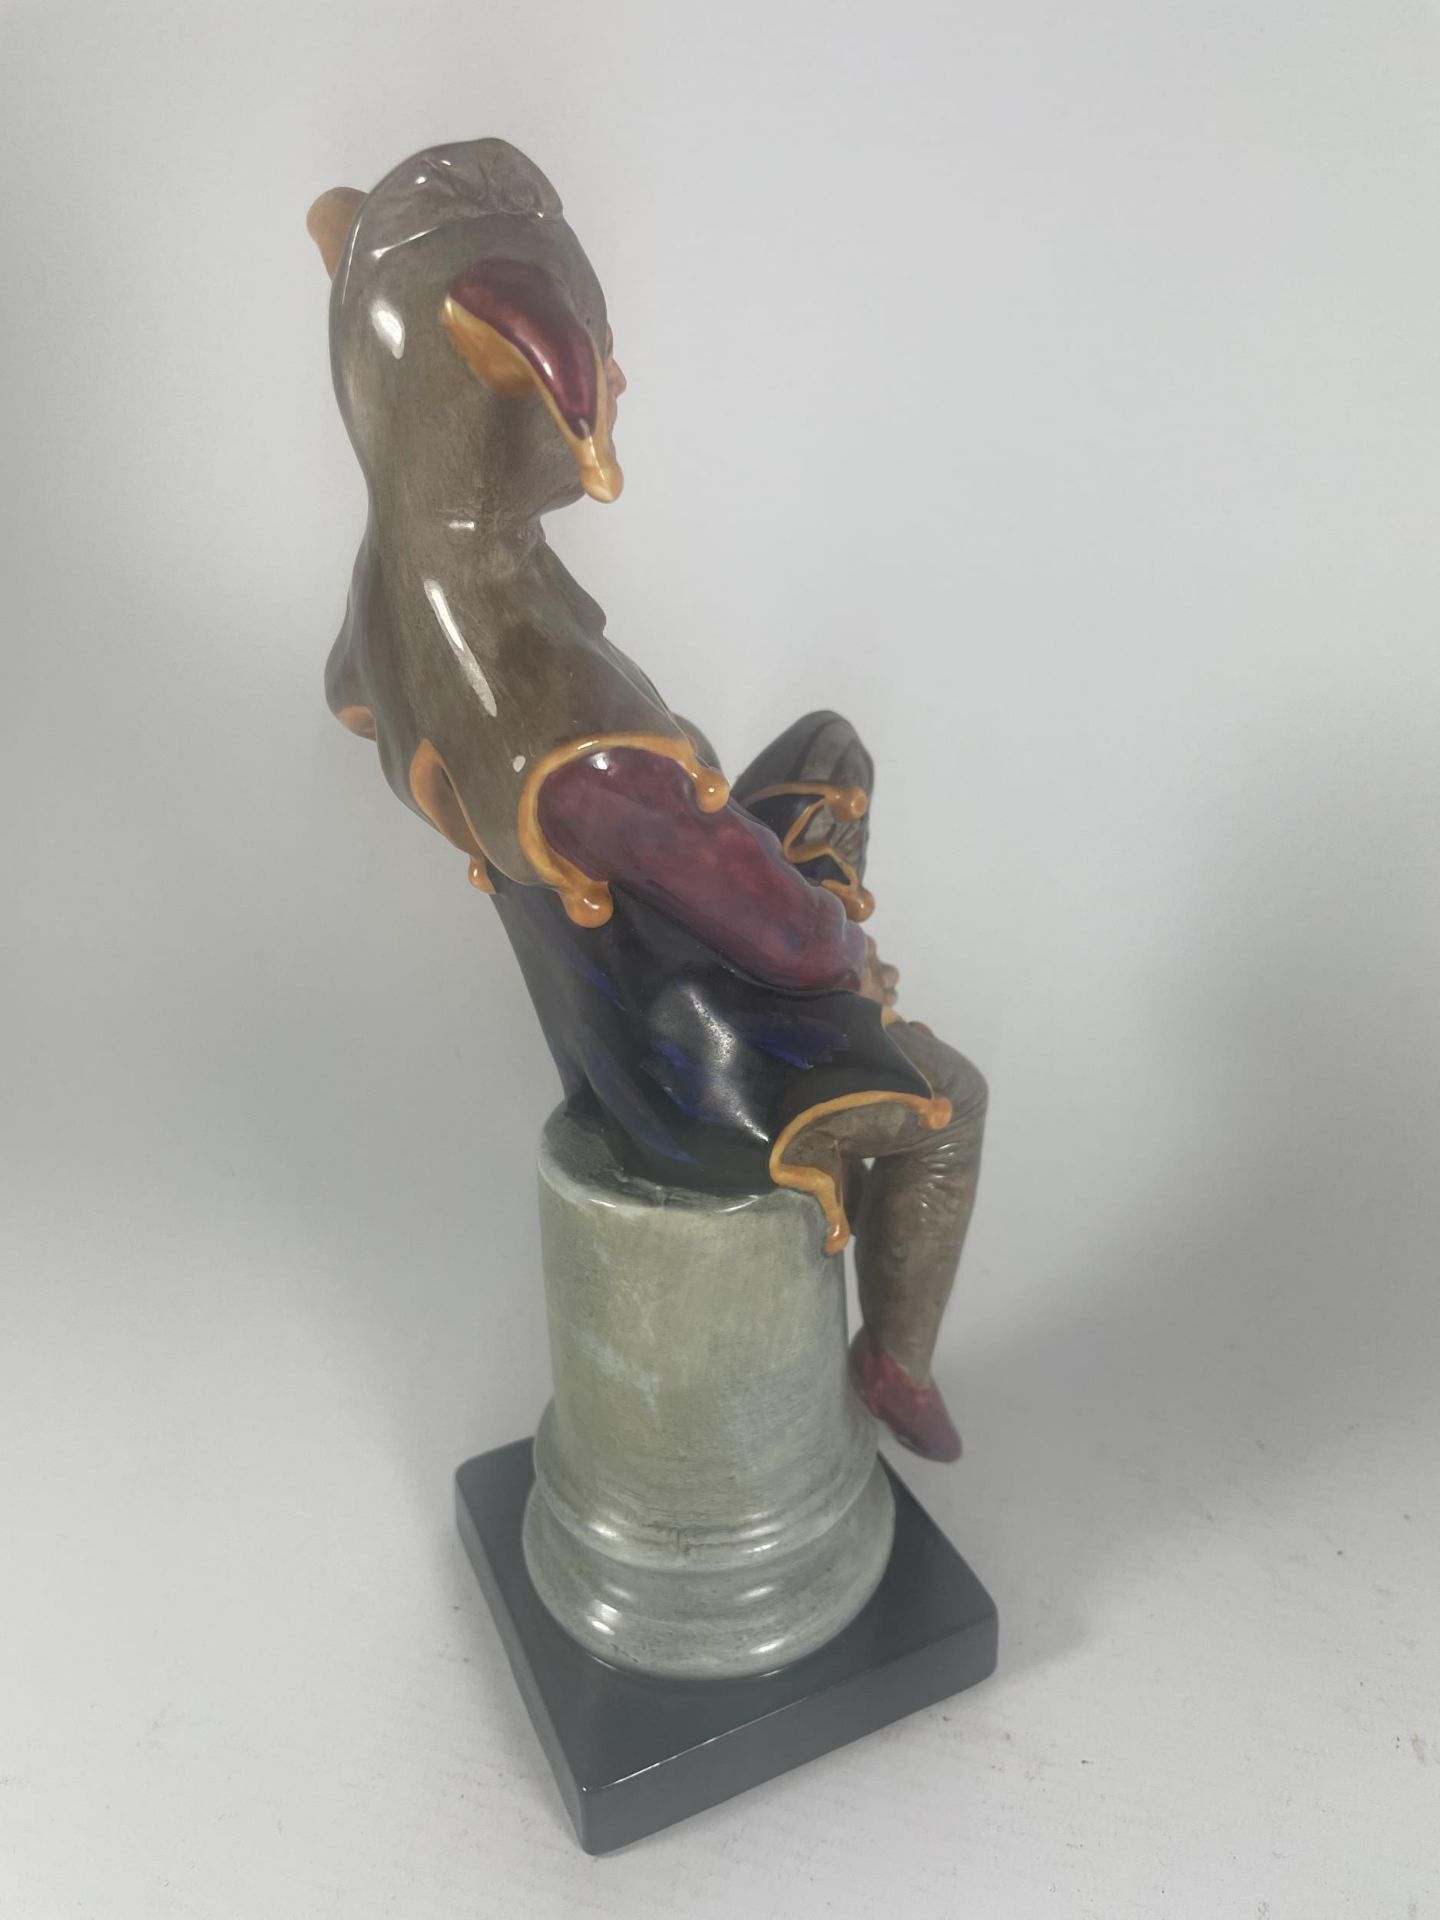 A ROYAL DOULTON 'JESTER' HN2016 FIGURE (SECONDS) - Image 3 of 5